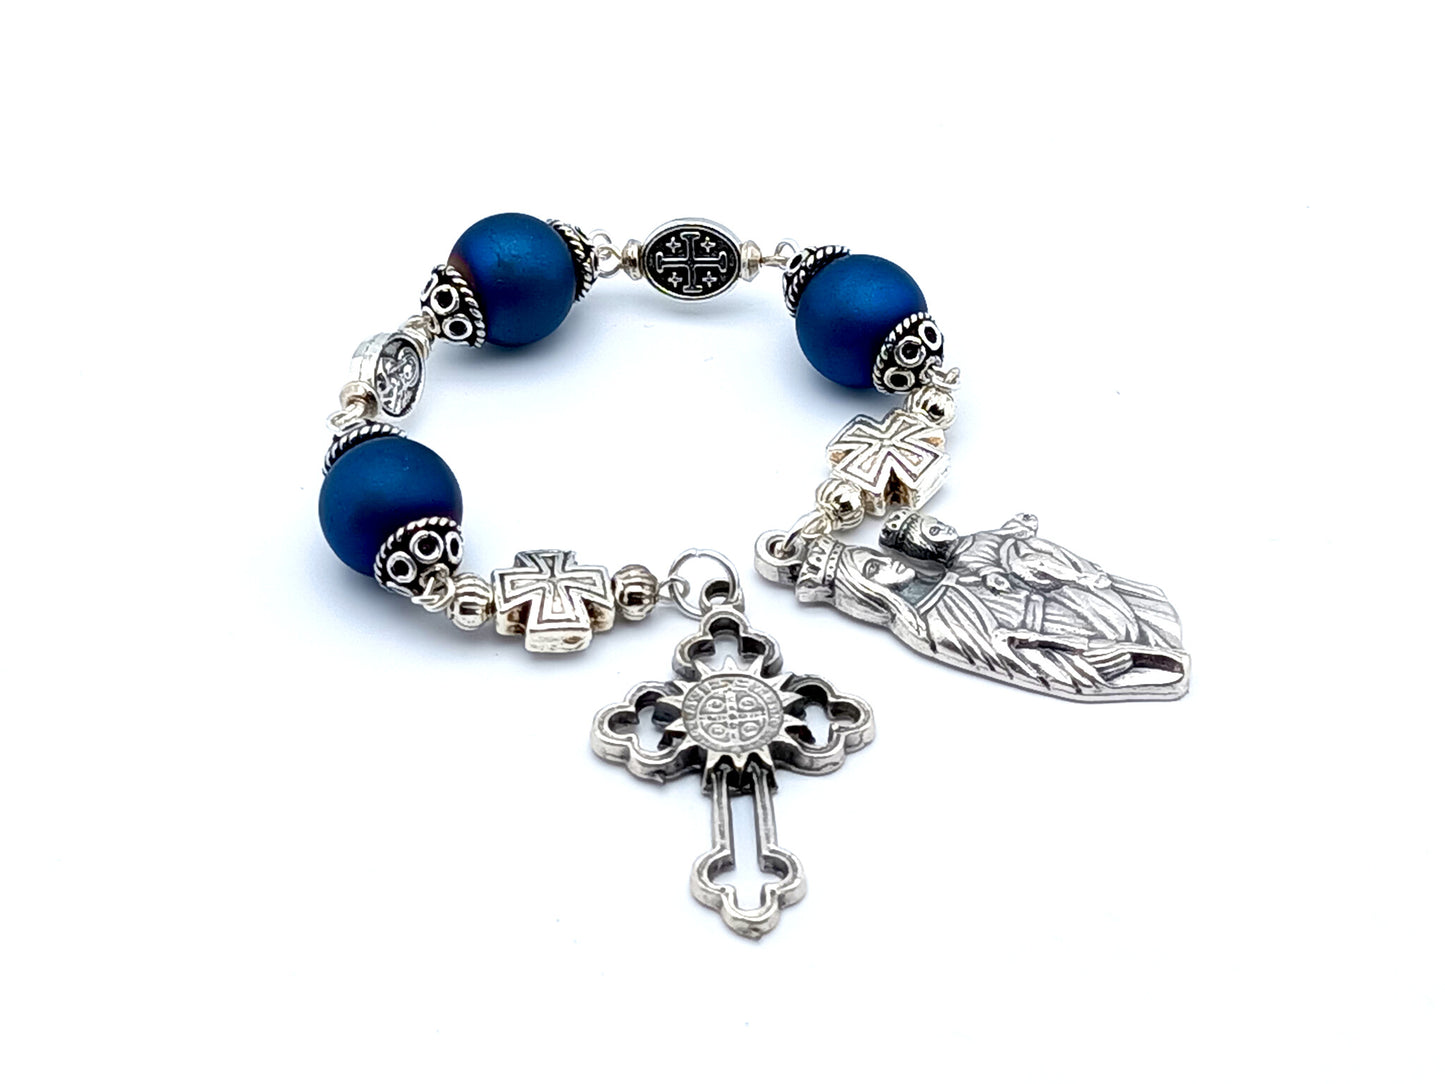 Our Lady of Victory unique rosary beads with blue glass and silver beads with Saint Benedict crucifix.